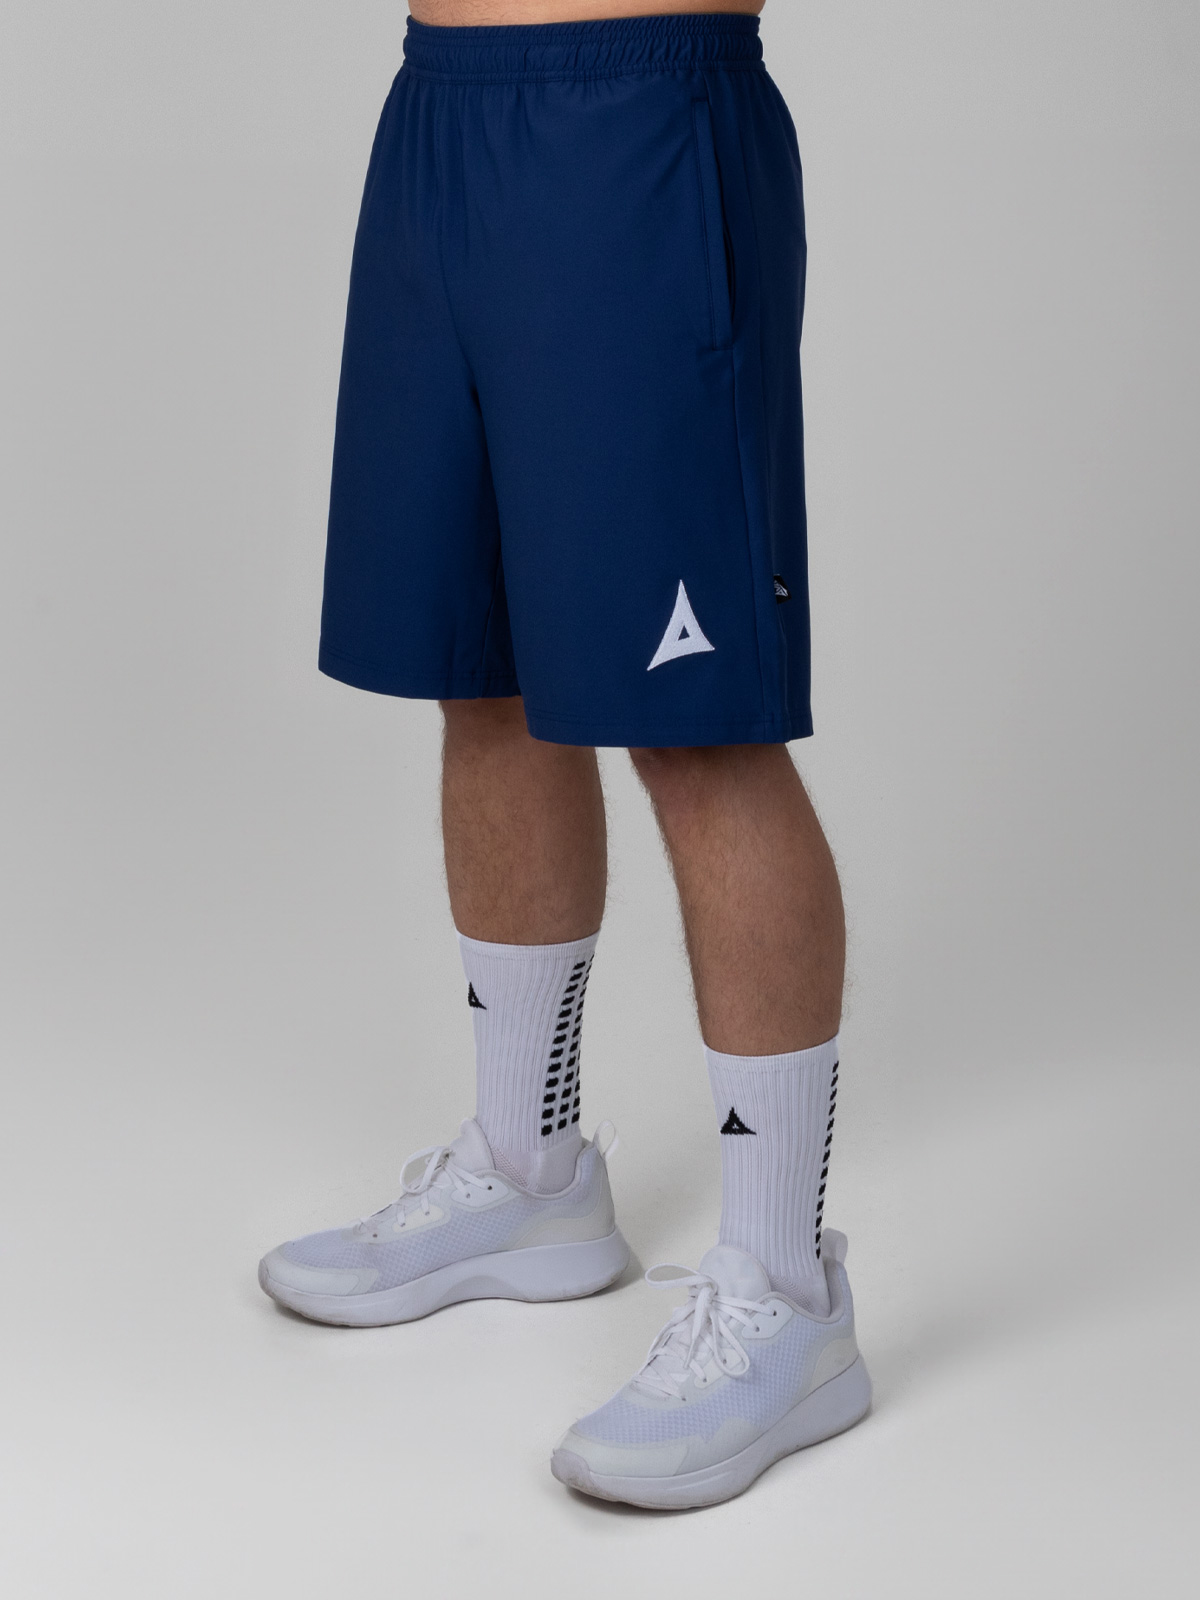 this man is wearing the focus classic navy blue tech shorts, which are ideal for training.